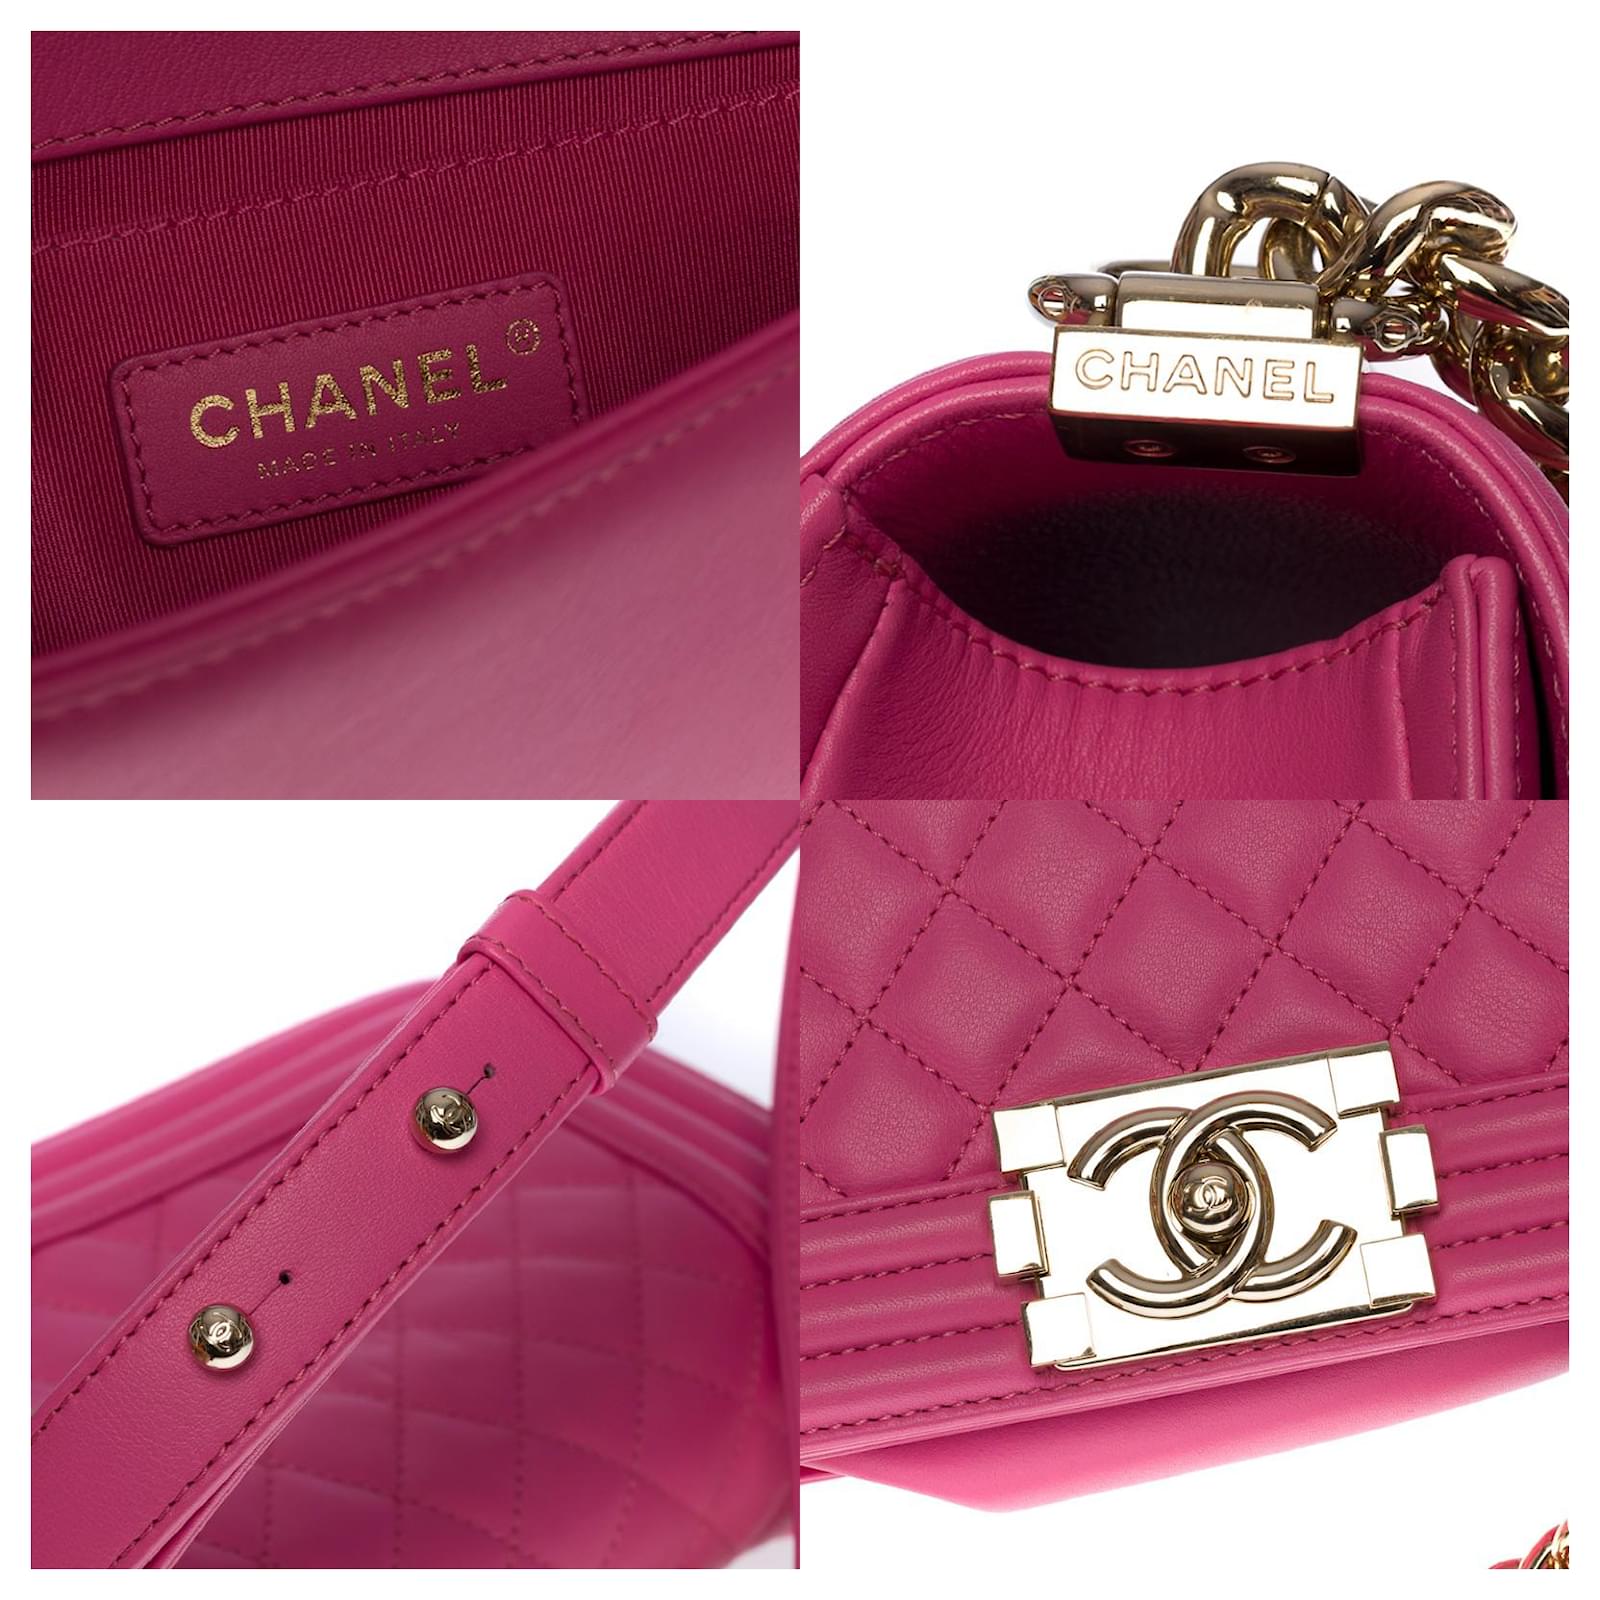 Lovely Chanel Boy Mini shoulder bag in pink quilted leather, shiny silver  metal hardware